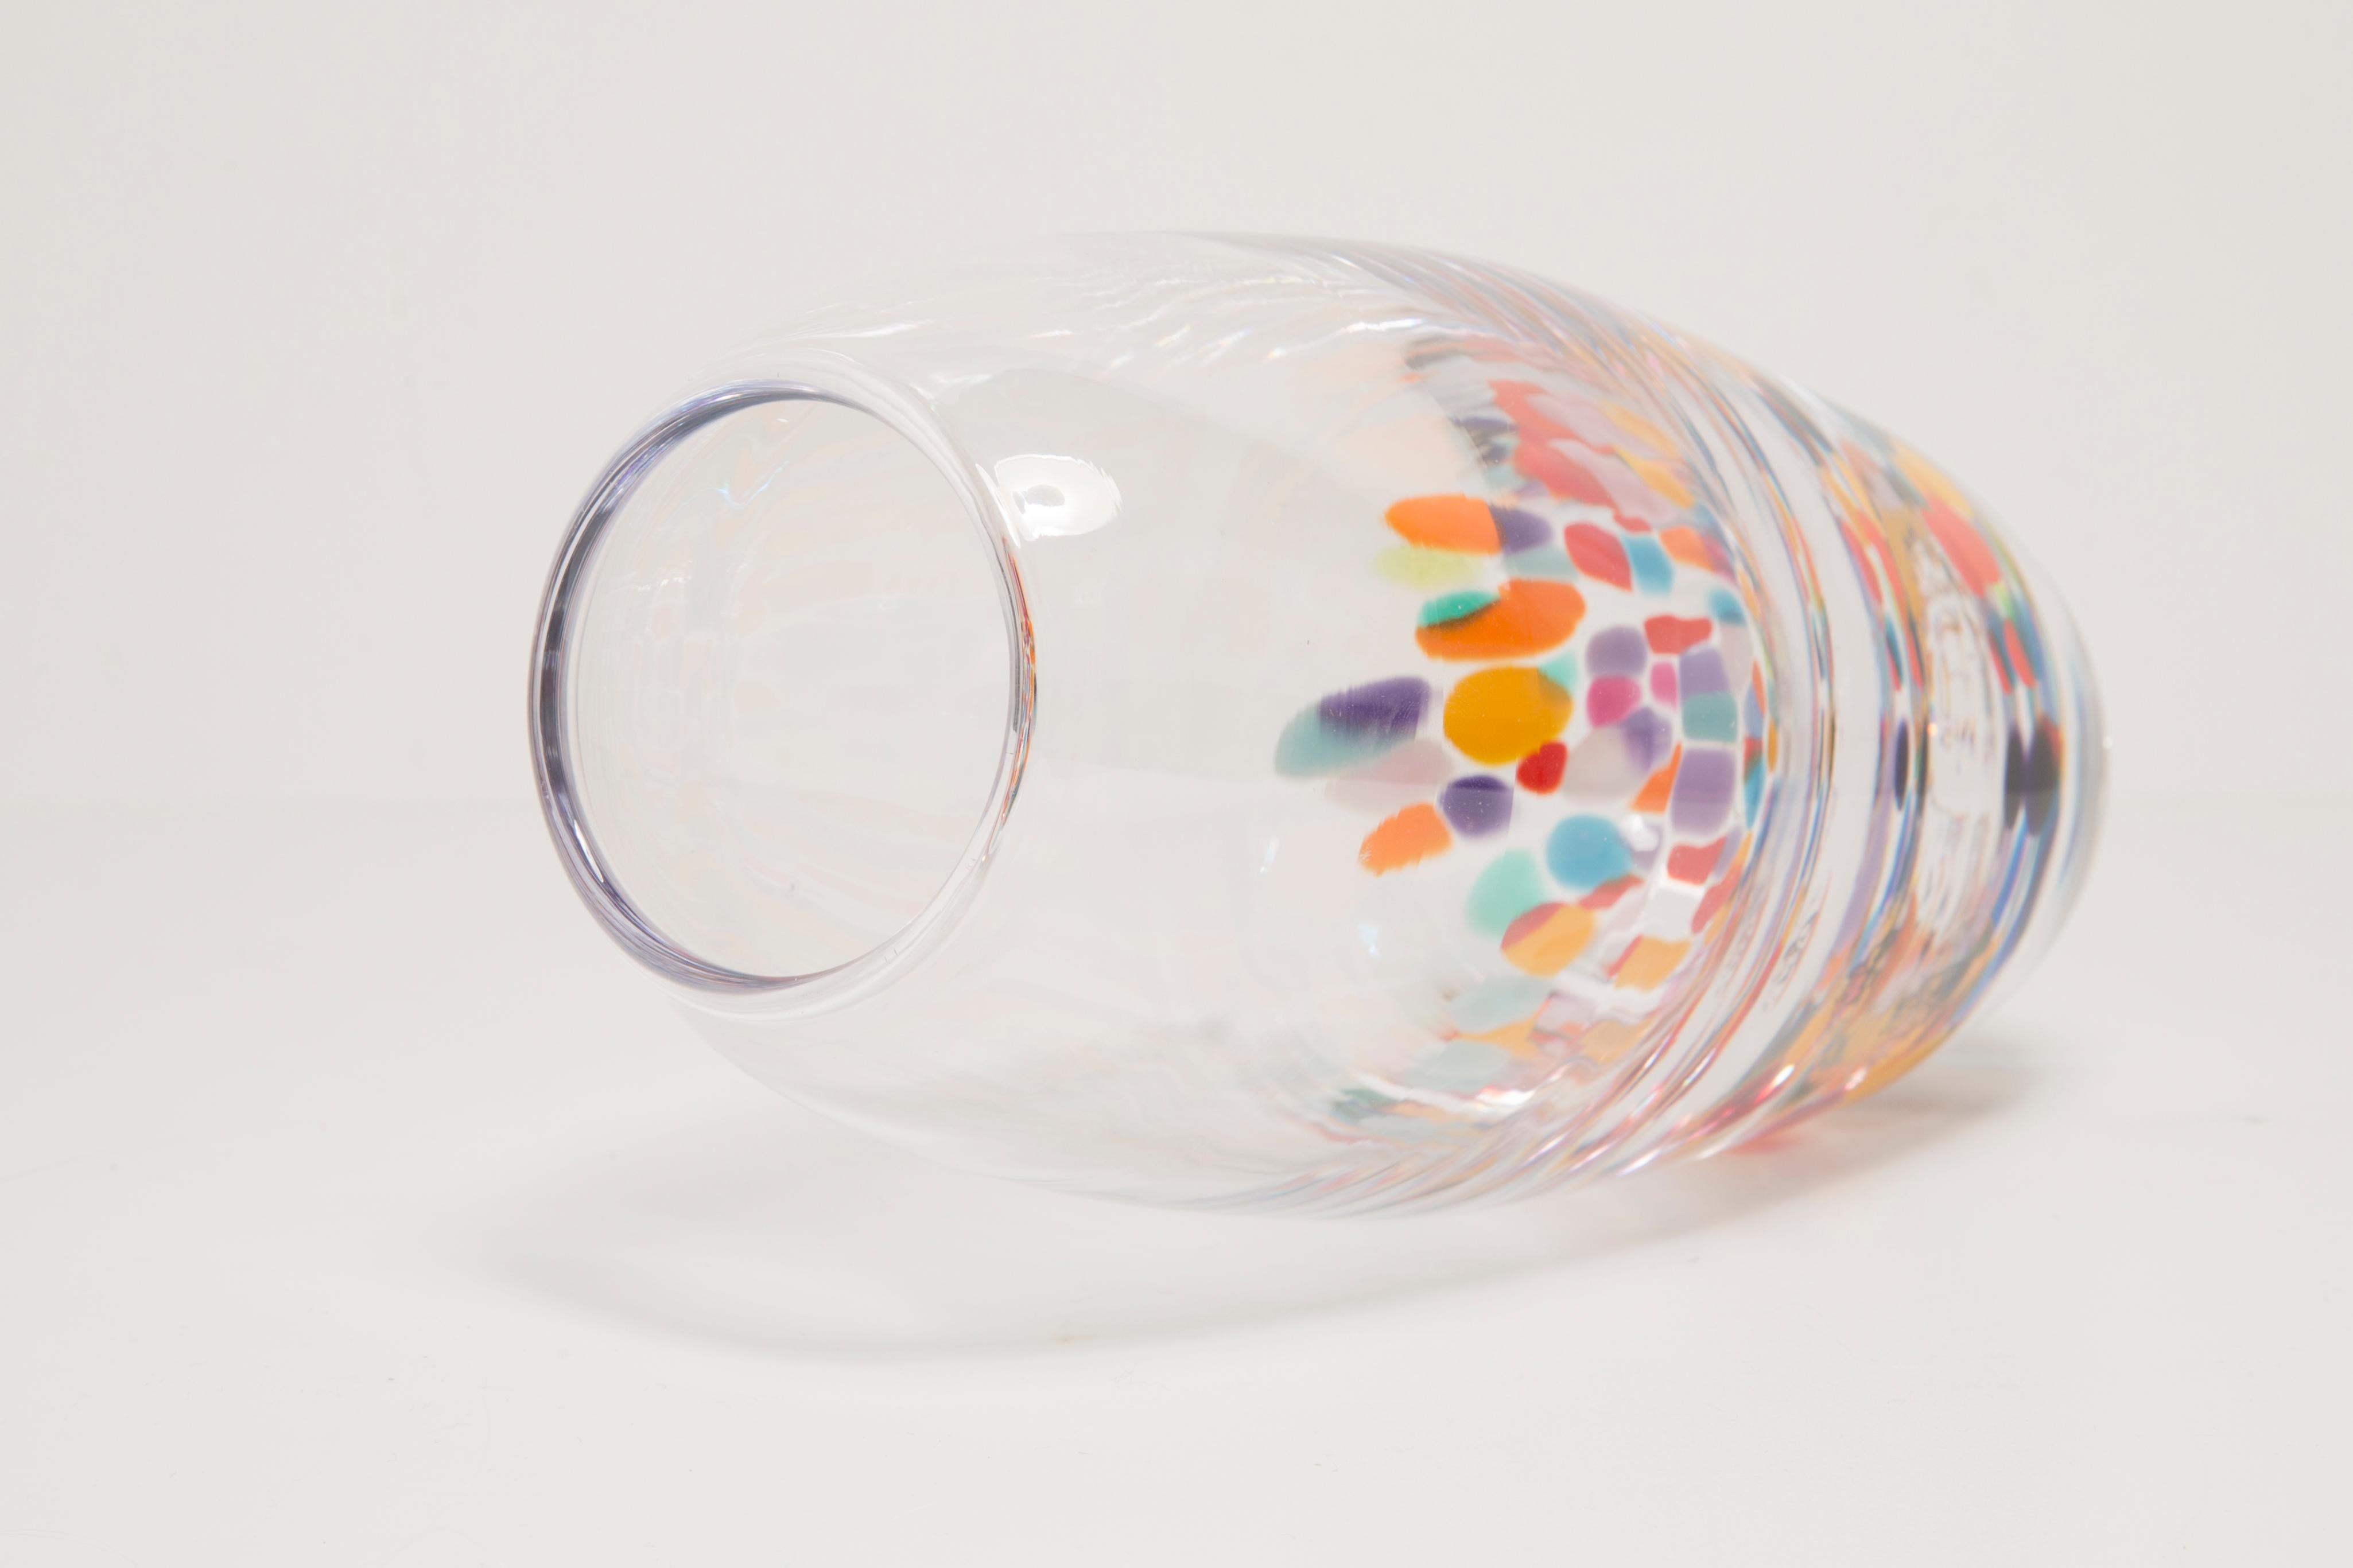 Mid-Century Vintage Dots Transparent Murano Glass Vase, Jerpoint, Irleand, 2000s For Sale 1